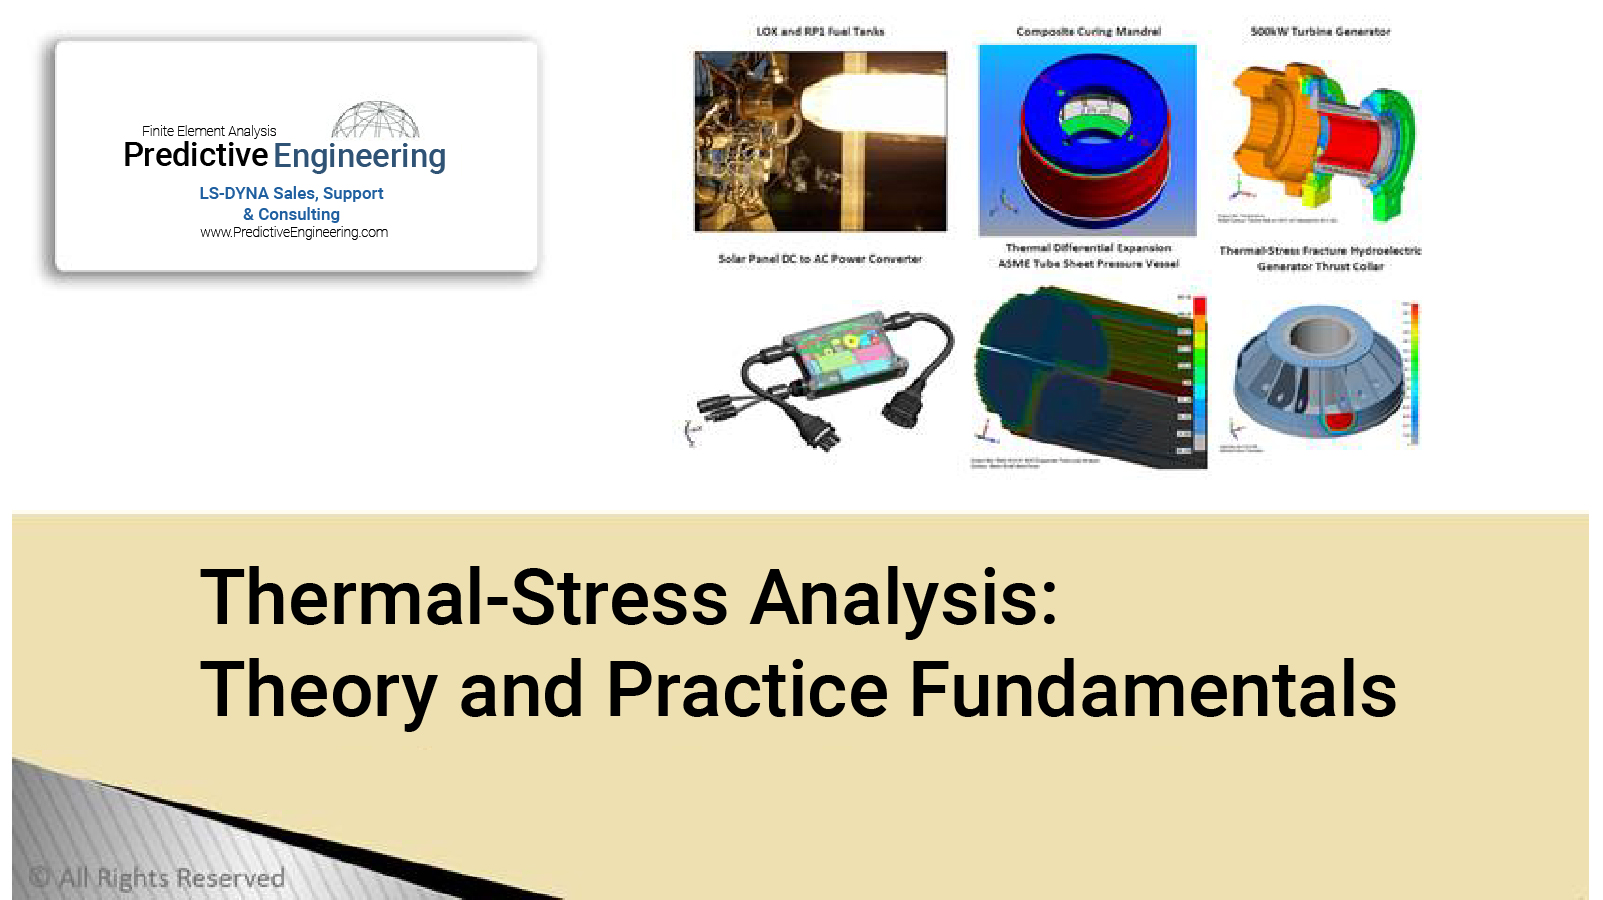 Thermal-Stress Analysis Theory and Practice - Predictive Engineering White Paper FEA Consulting Services